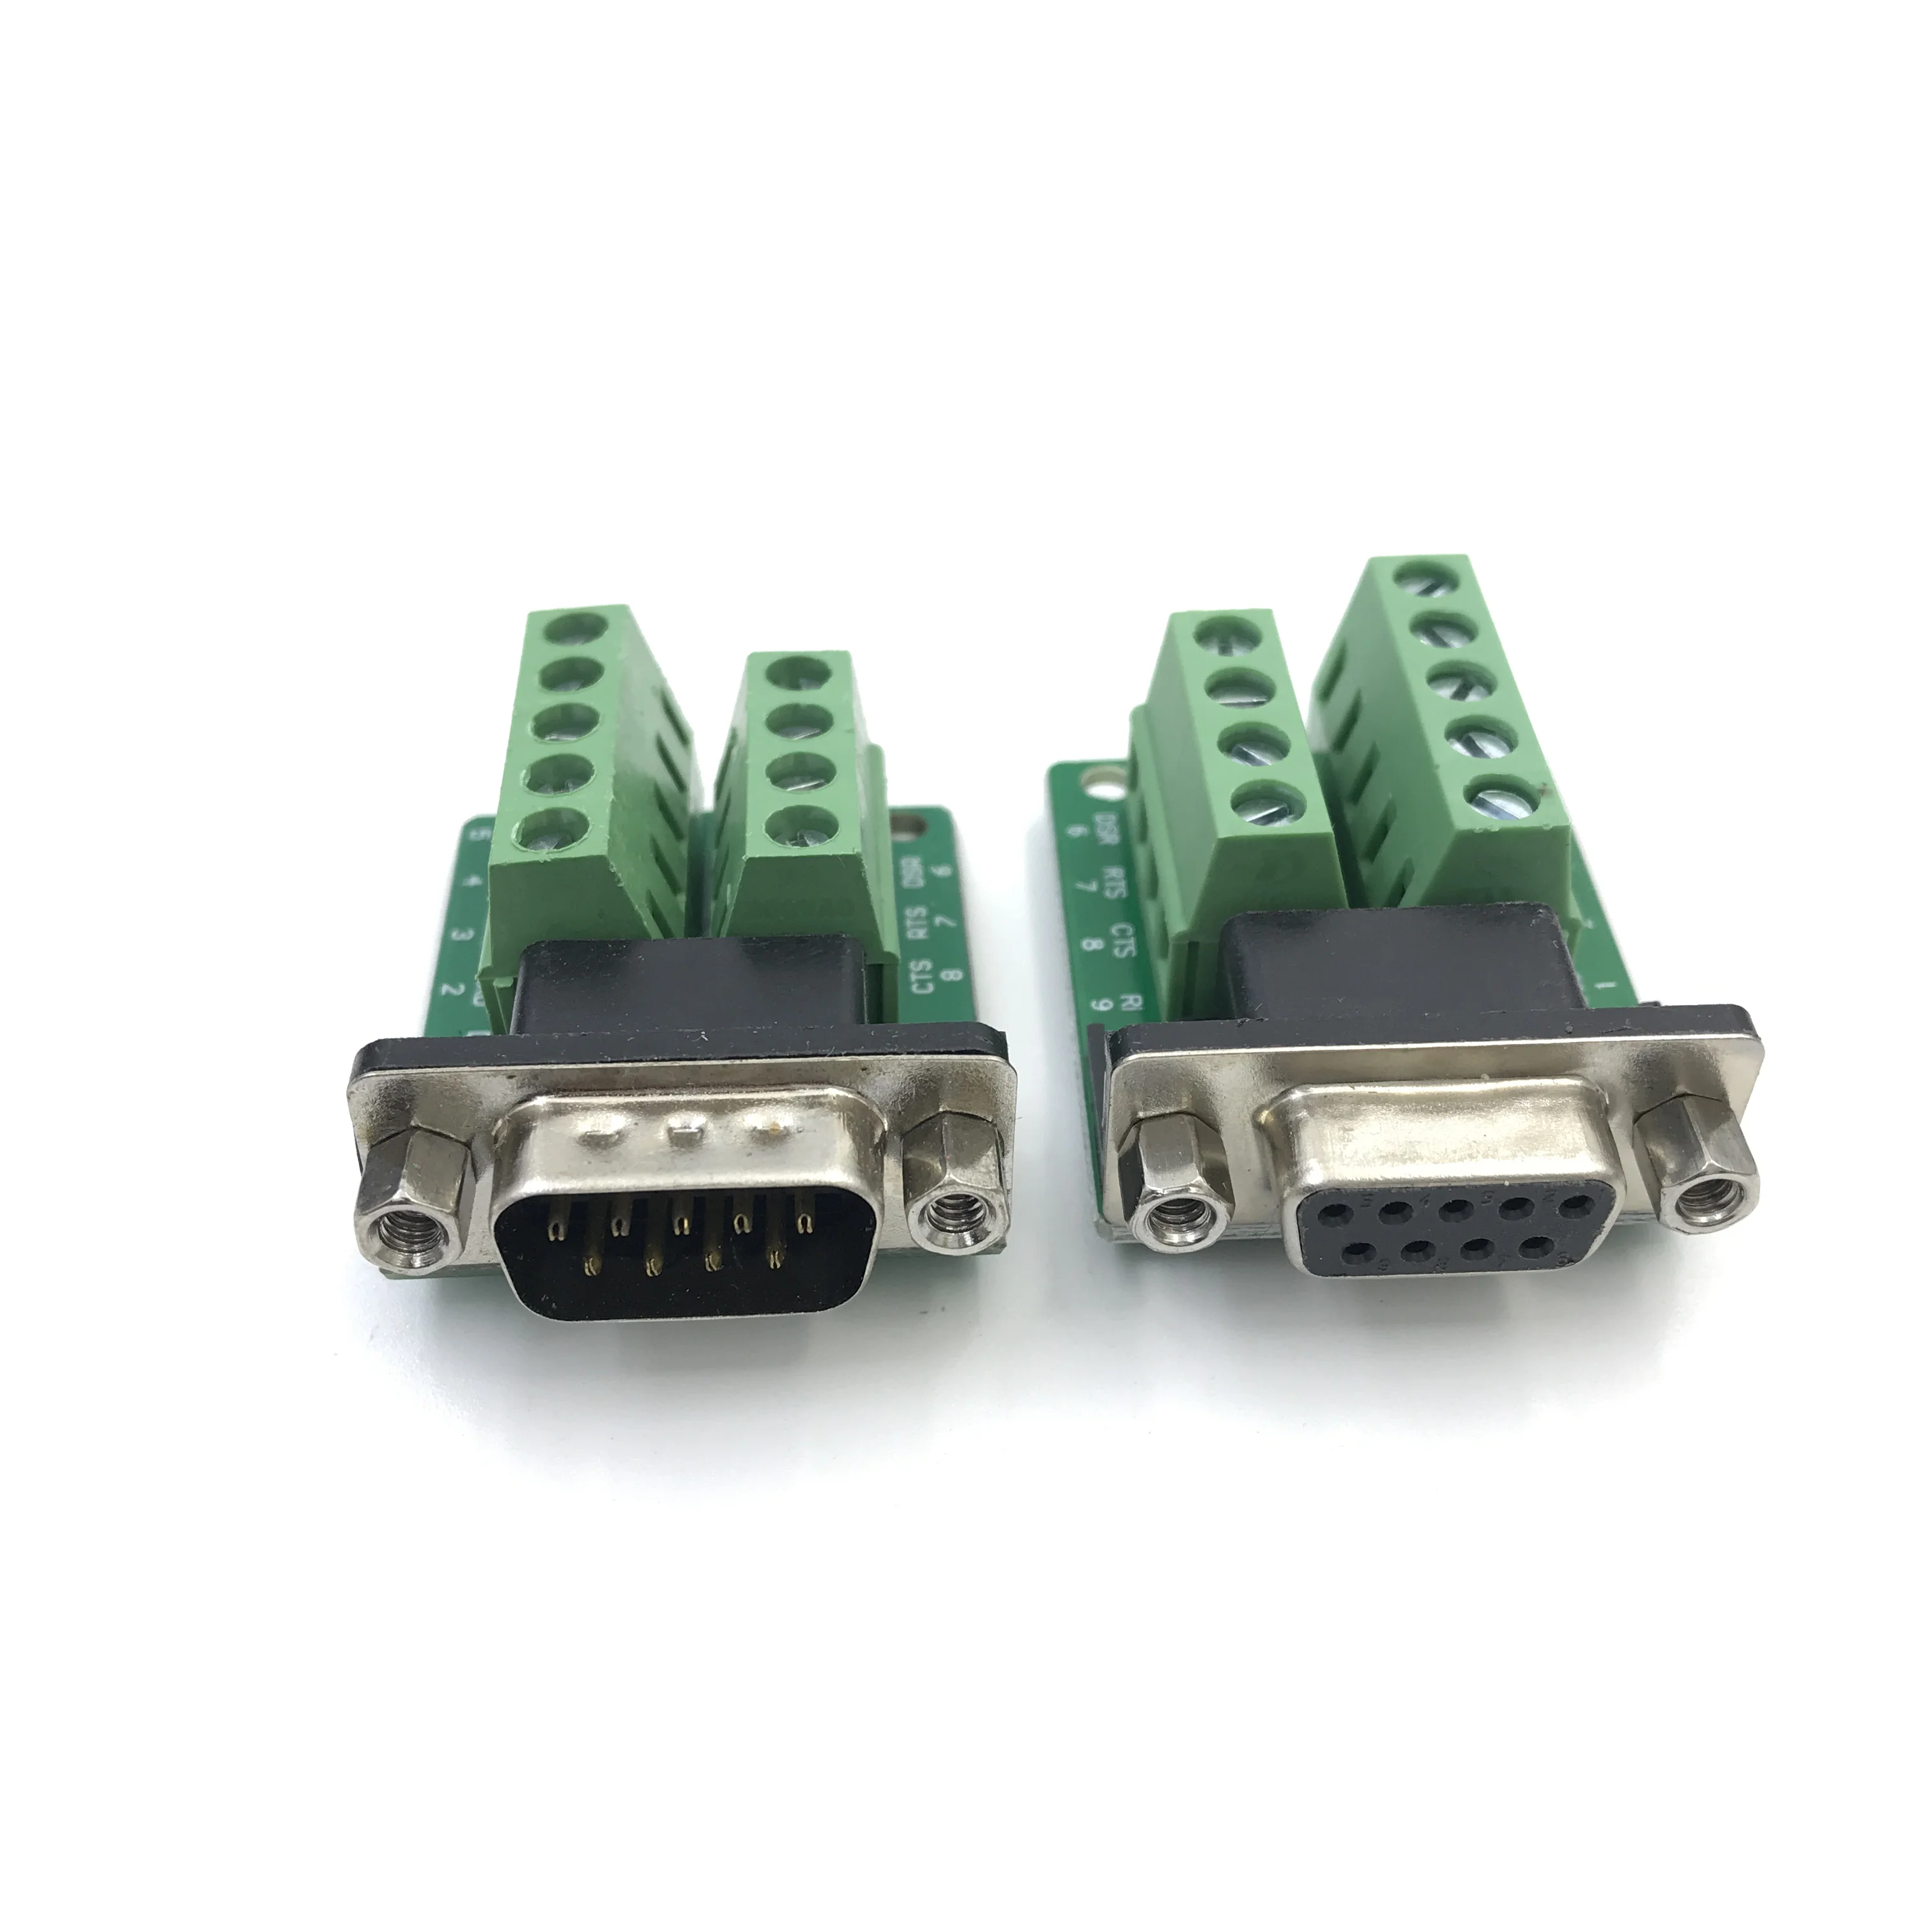 DB9 connector female adapter signals Terminal module RS232 to Terminal M114 